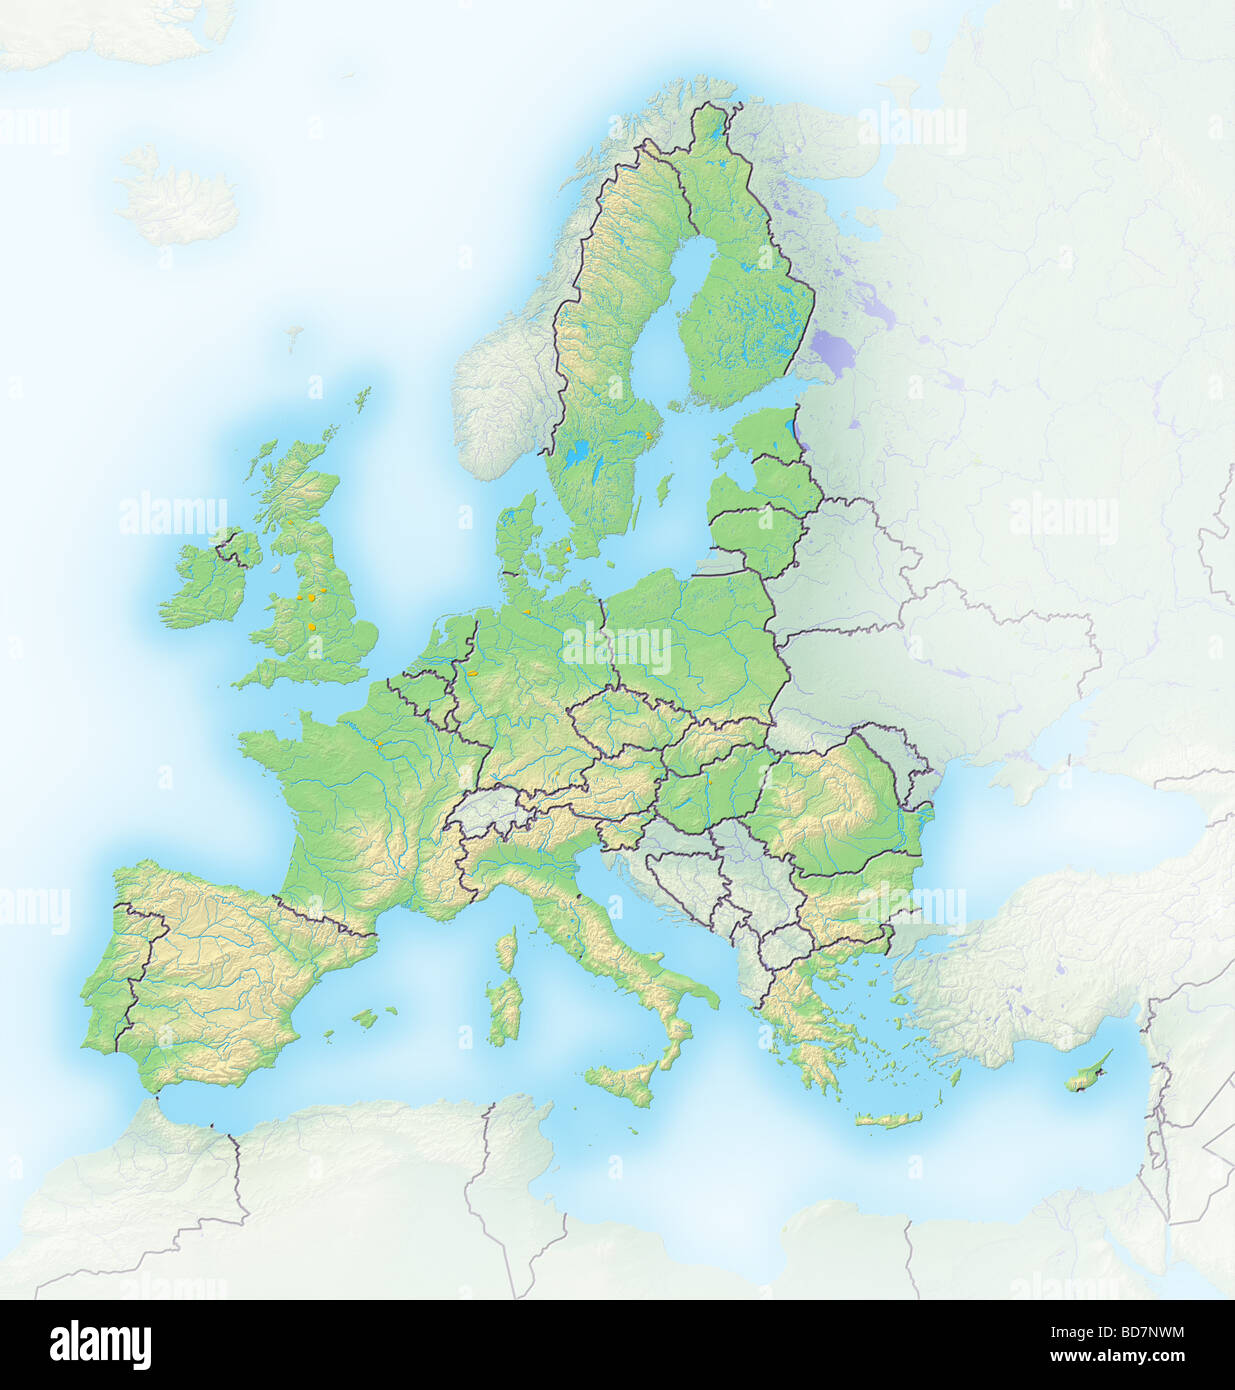 European Union, shaded relief map. Stock Photo